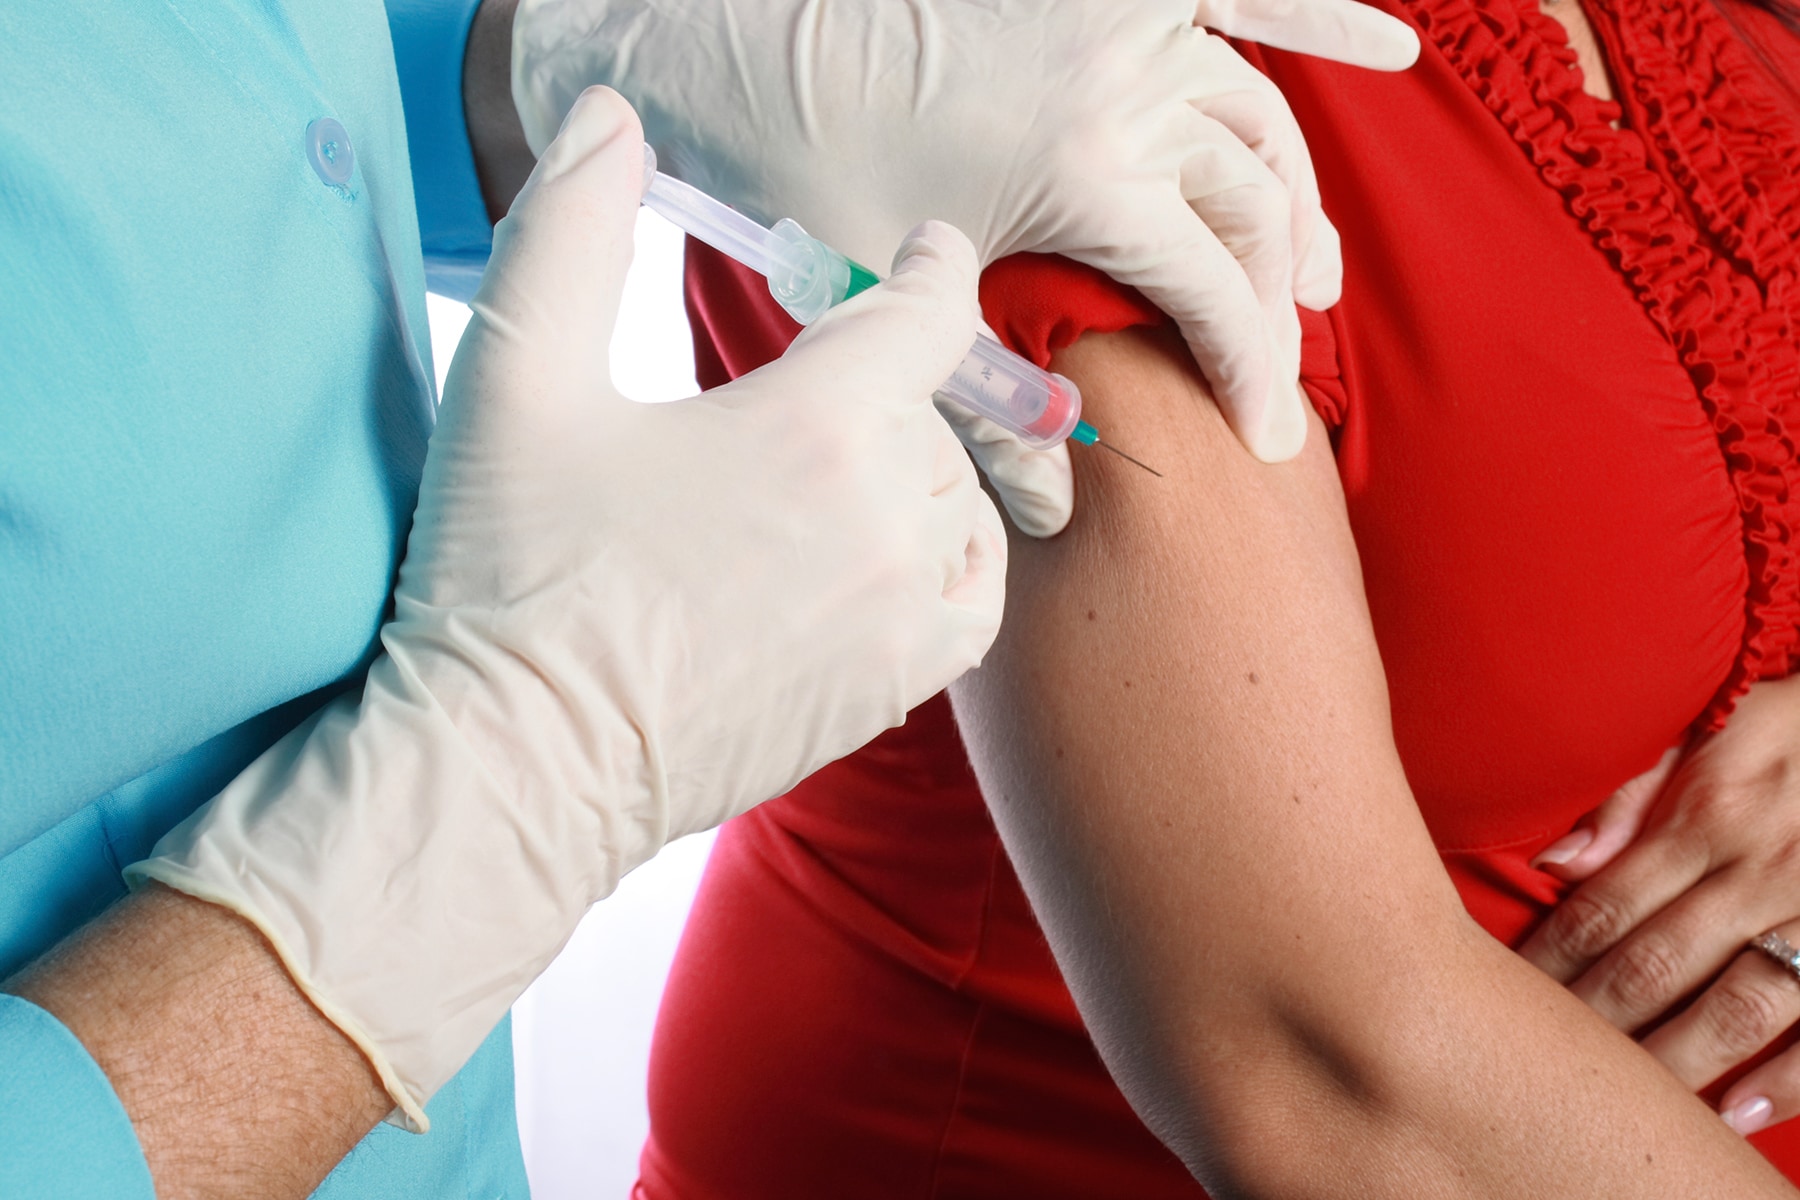 You Bought Your COVID Shot: What to Attain With the Vaccine Card